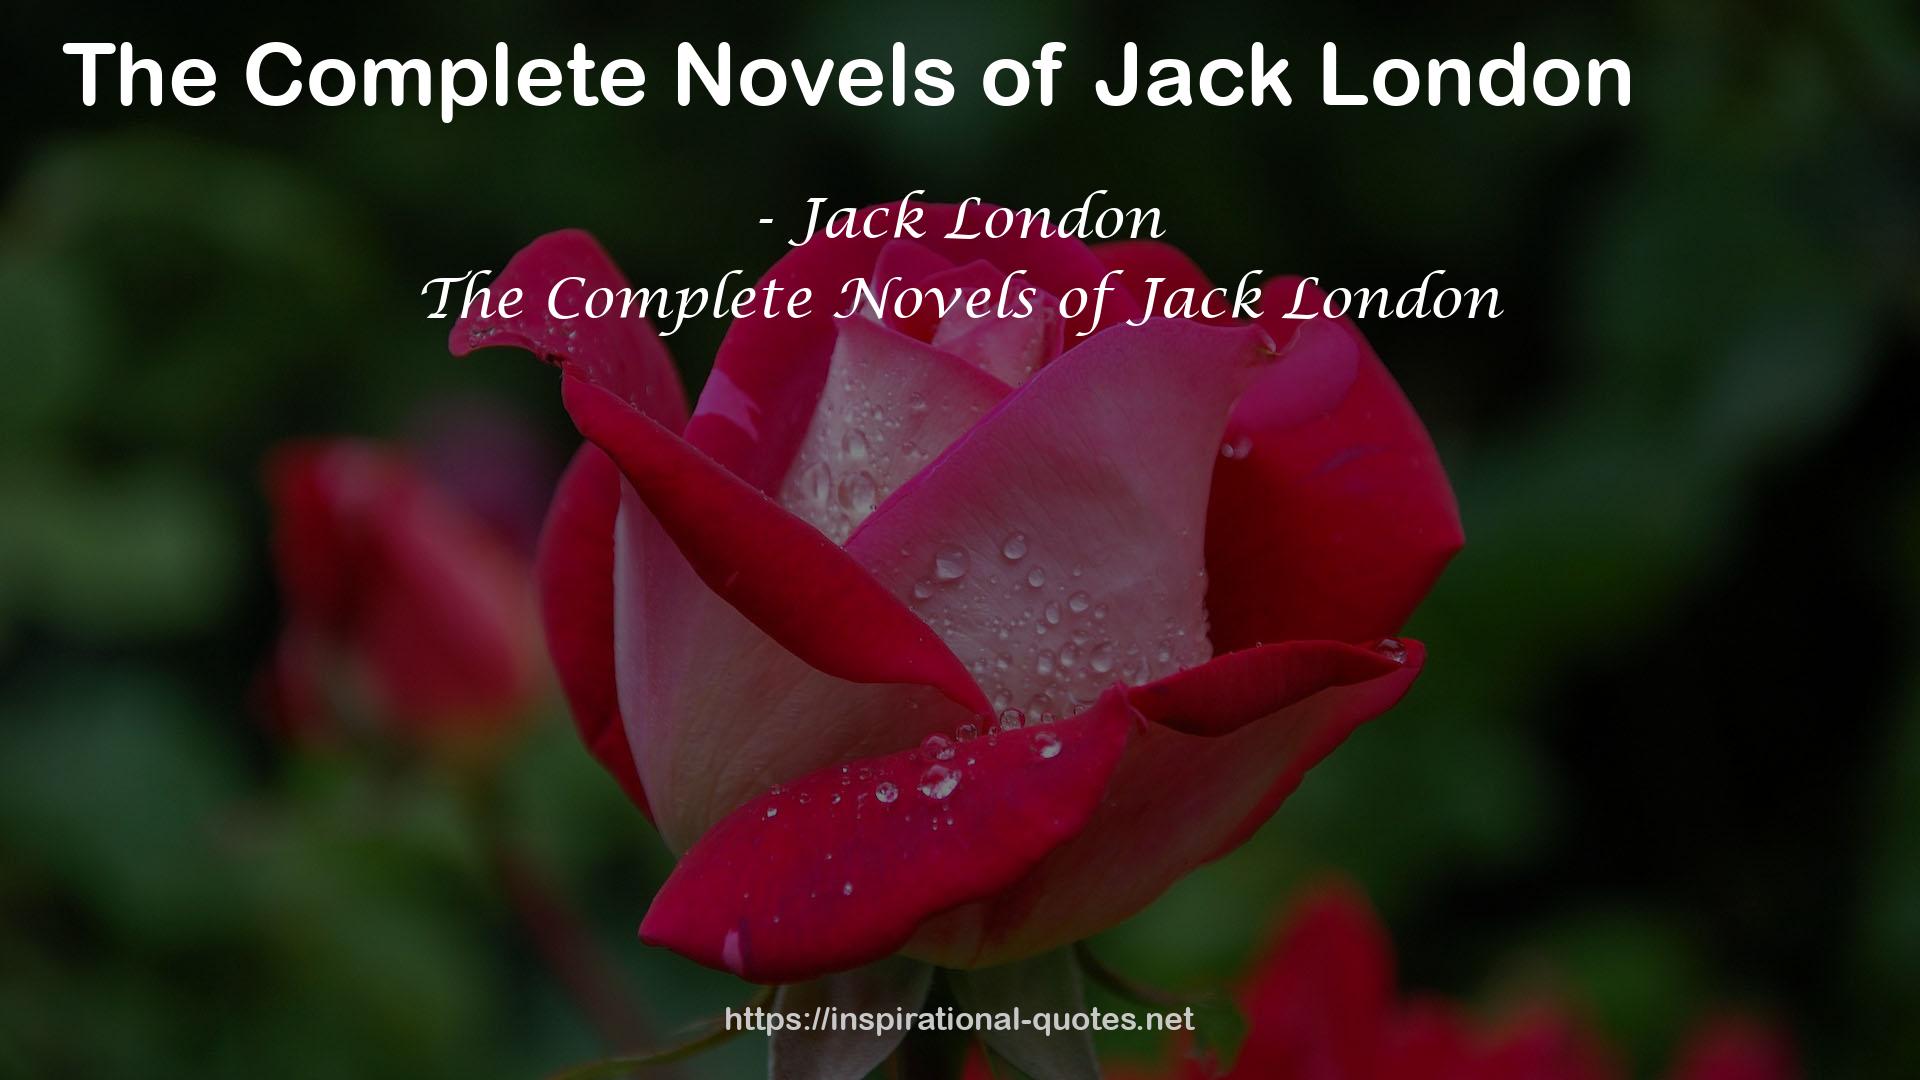 The Complete Novels of Jack London QUOTES